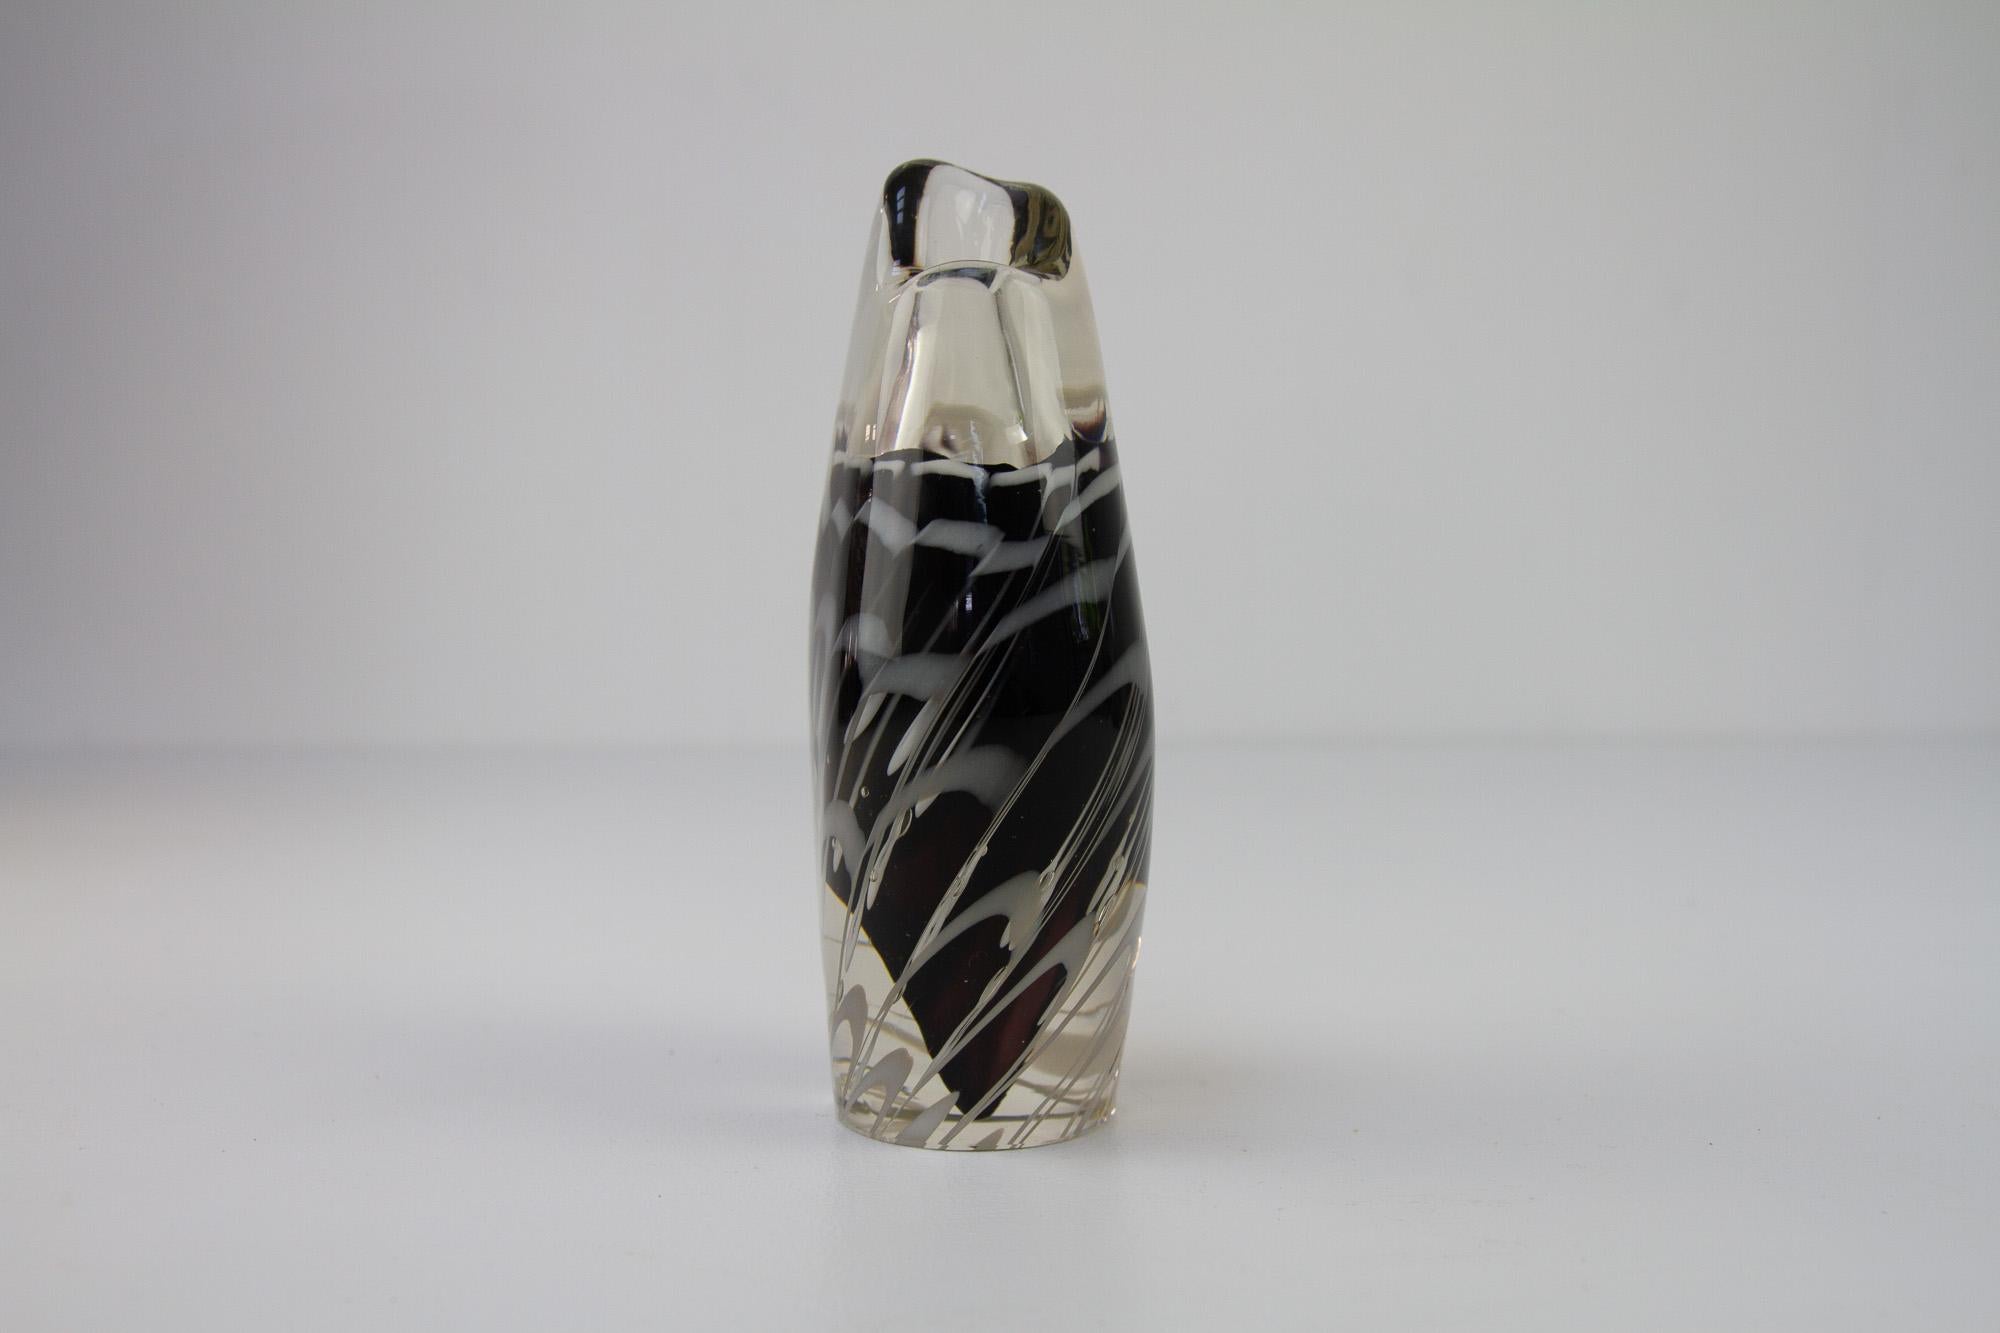 Vintage Crystal Coquille Vase by Paul Kedelv for Flygsfors Sweden, 1950s.
Small Swedish glass vase signed with Coquille and Flygsfors/56 which indicates it was made in 1956.
Height 15.5 centimeters. Mesh pattern in black and white inside the clear